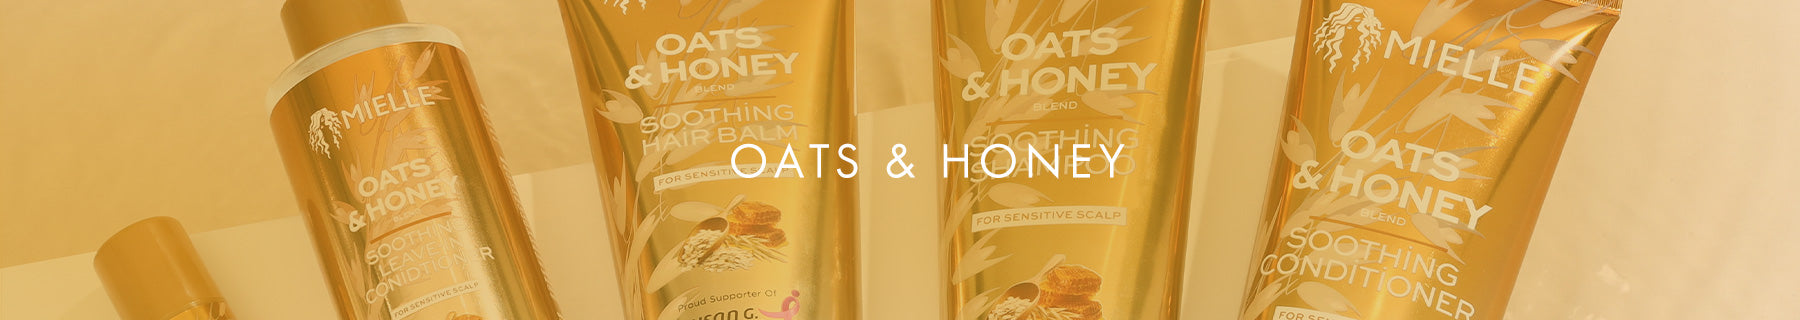 Image showing all the oats and honey hair products 